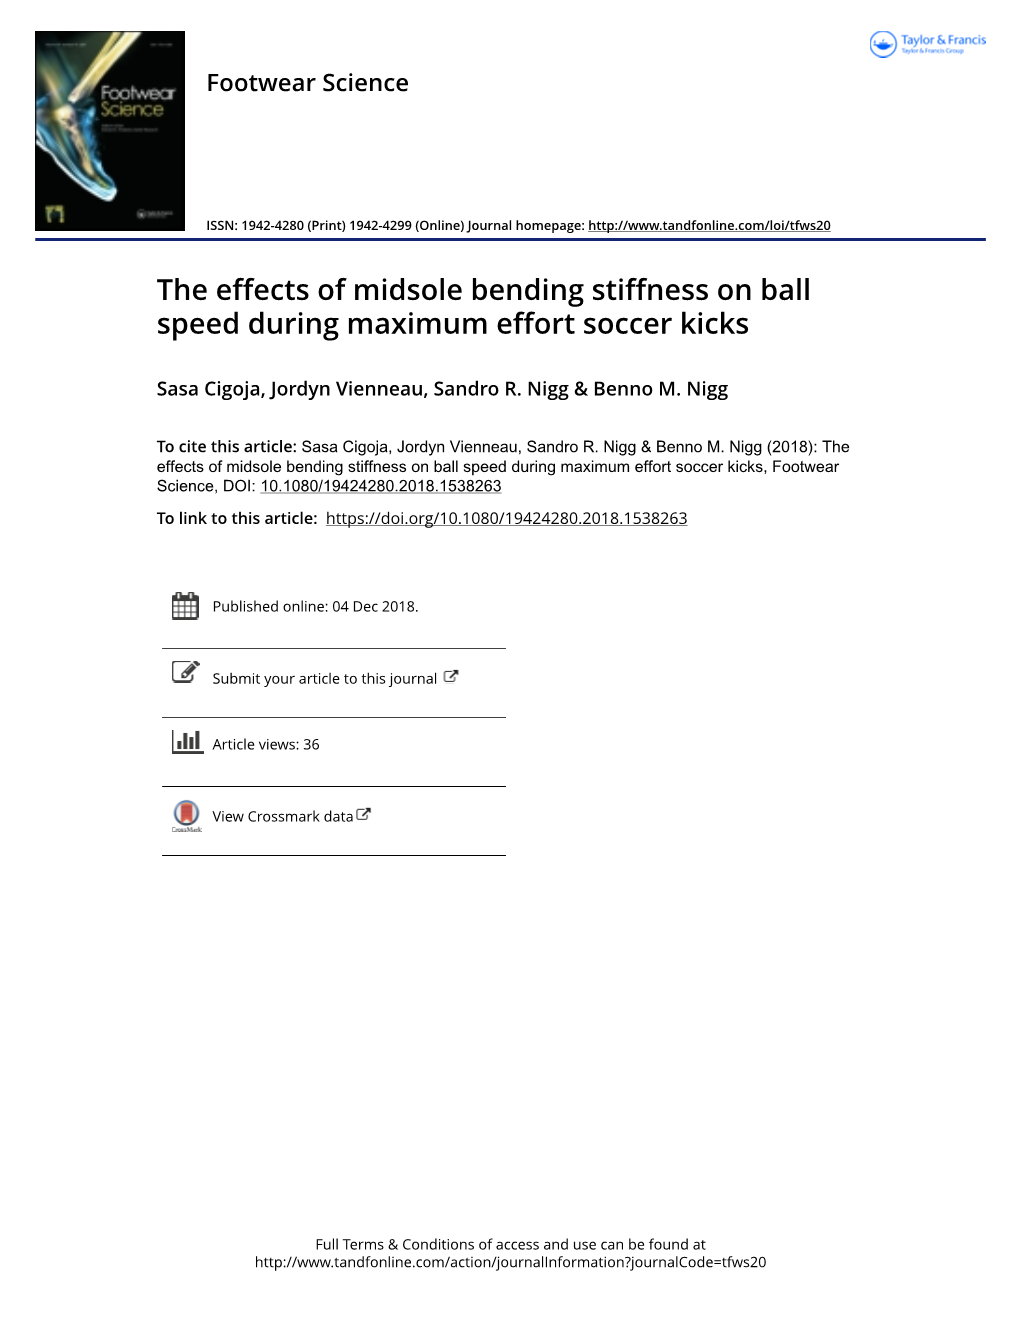 The Effects of Midsole Bending Stiffness on Ball Speed During Maximum Effort Soccer Kicks